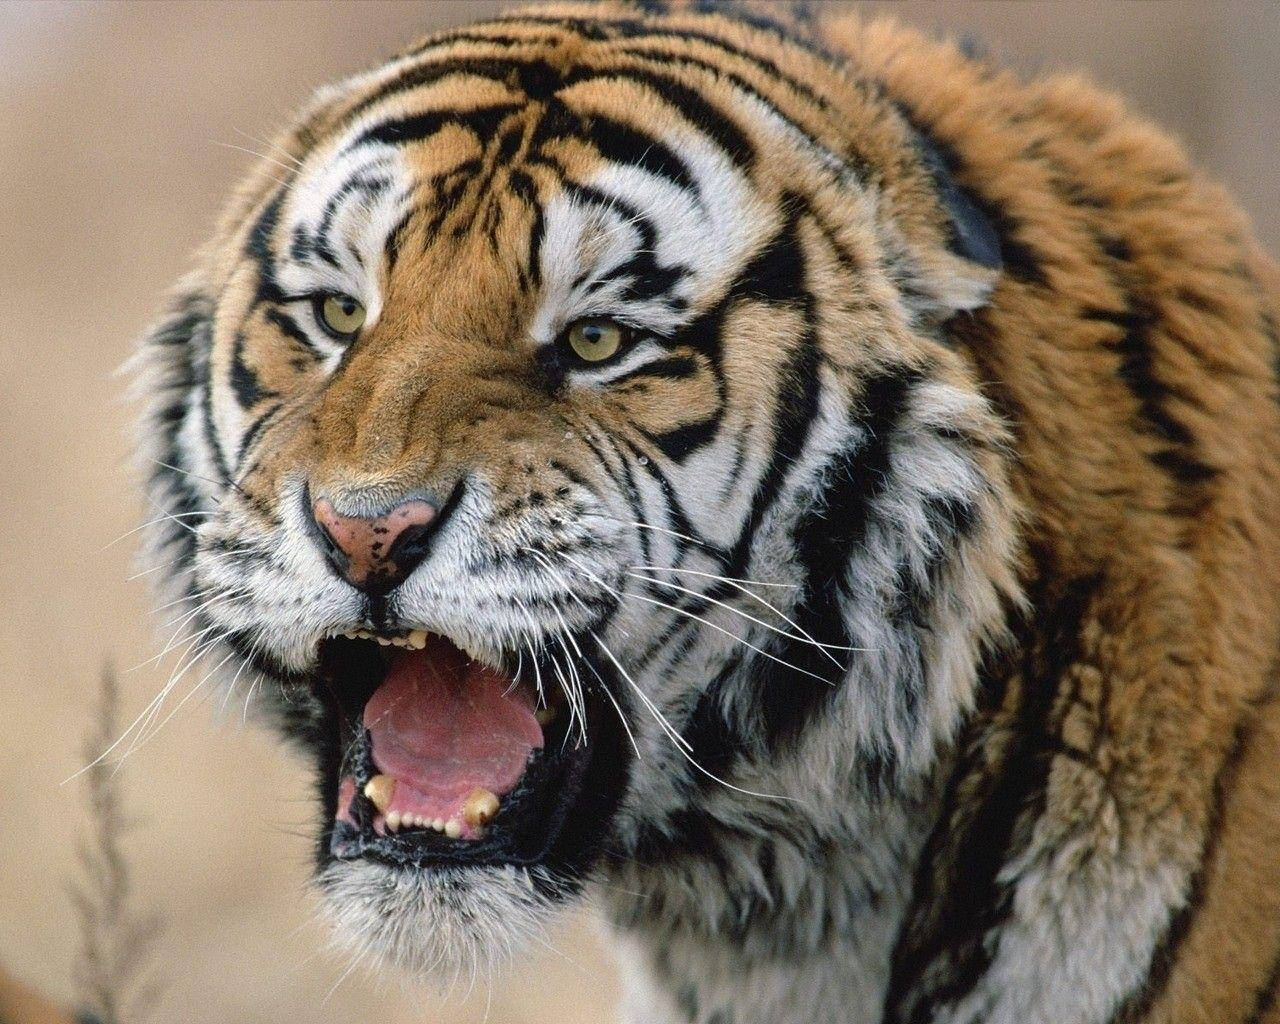 Growling Angry Tiger Wallpaper